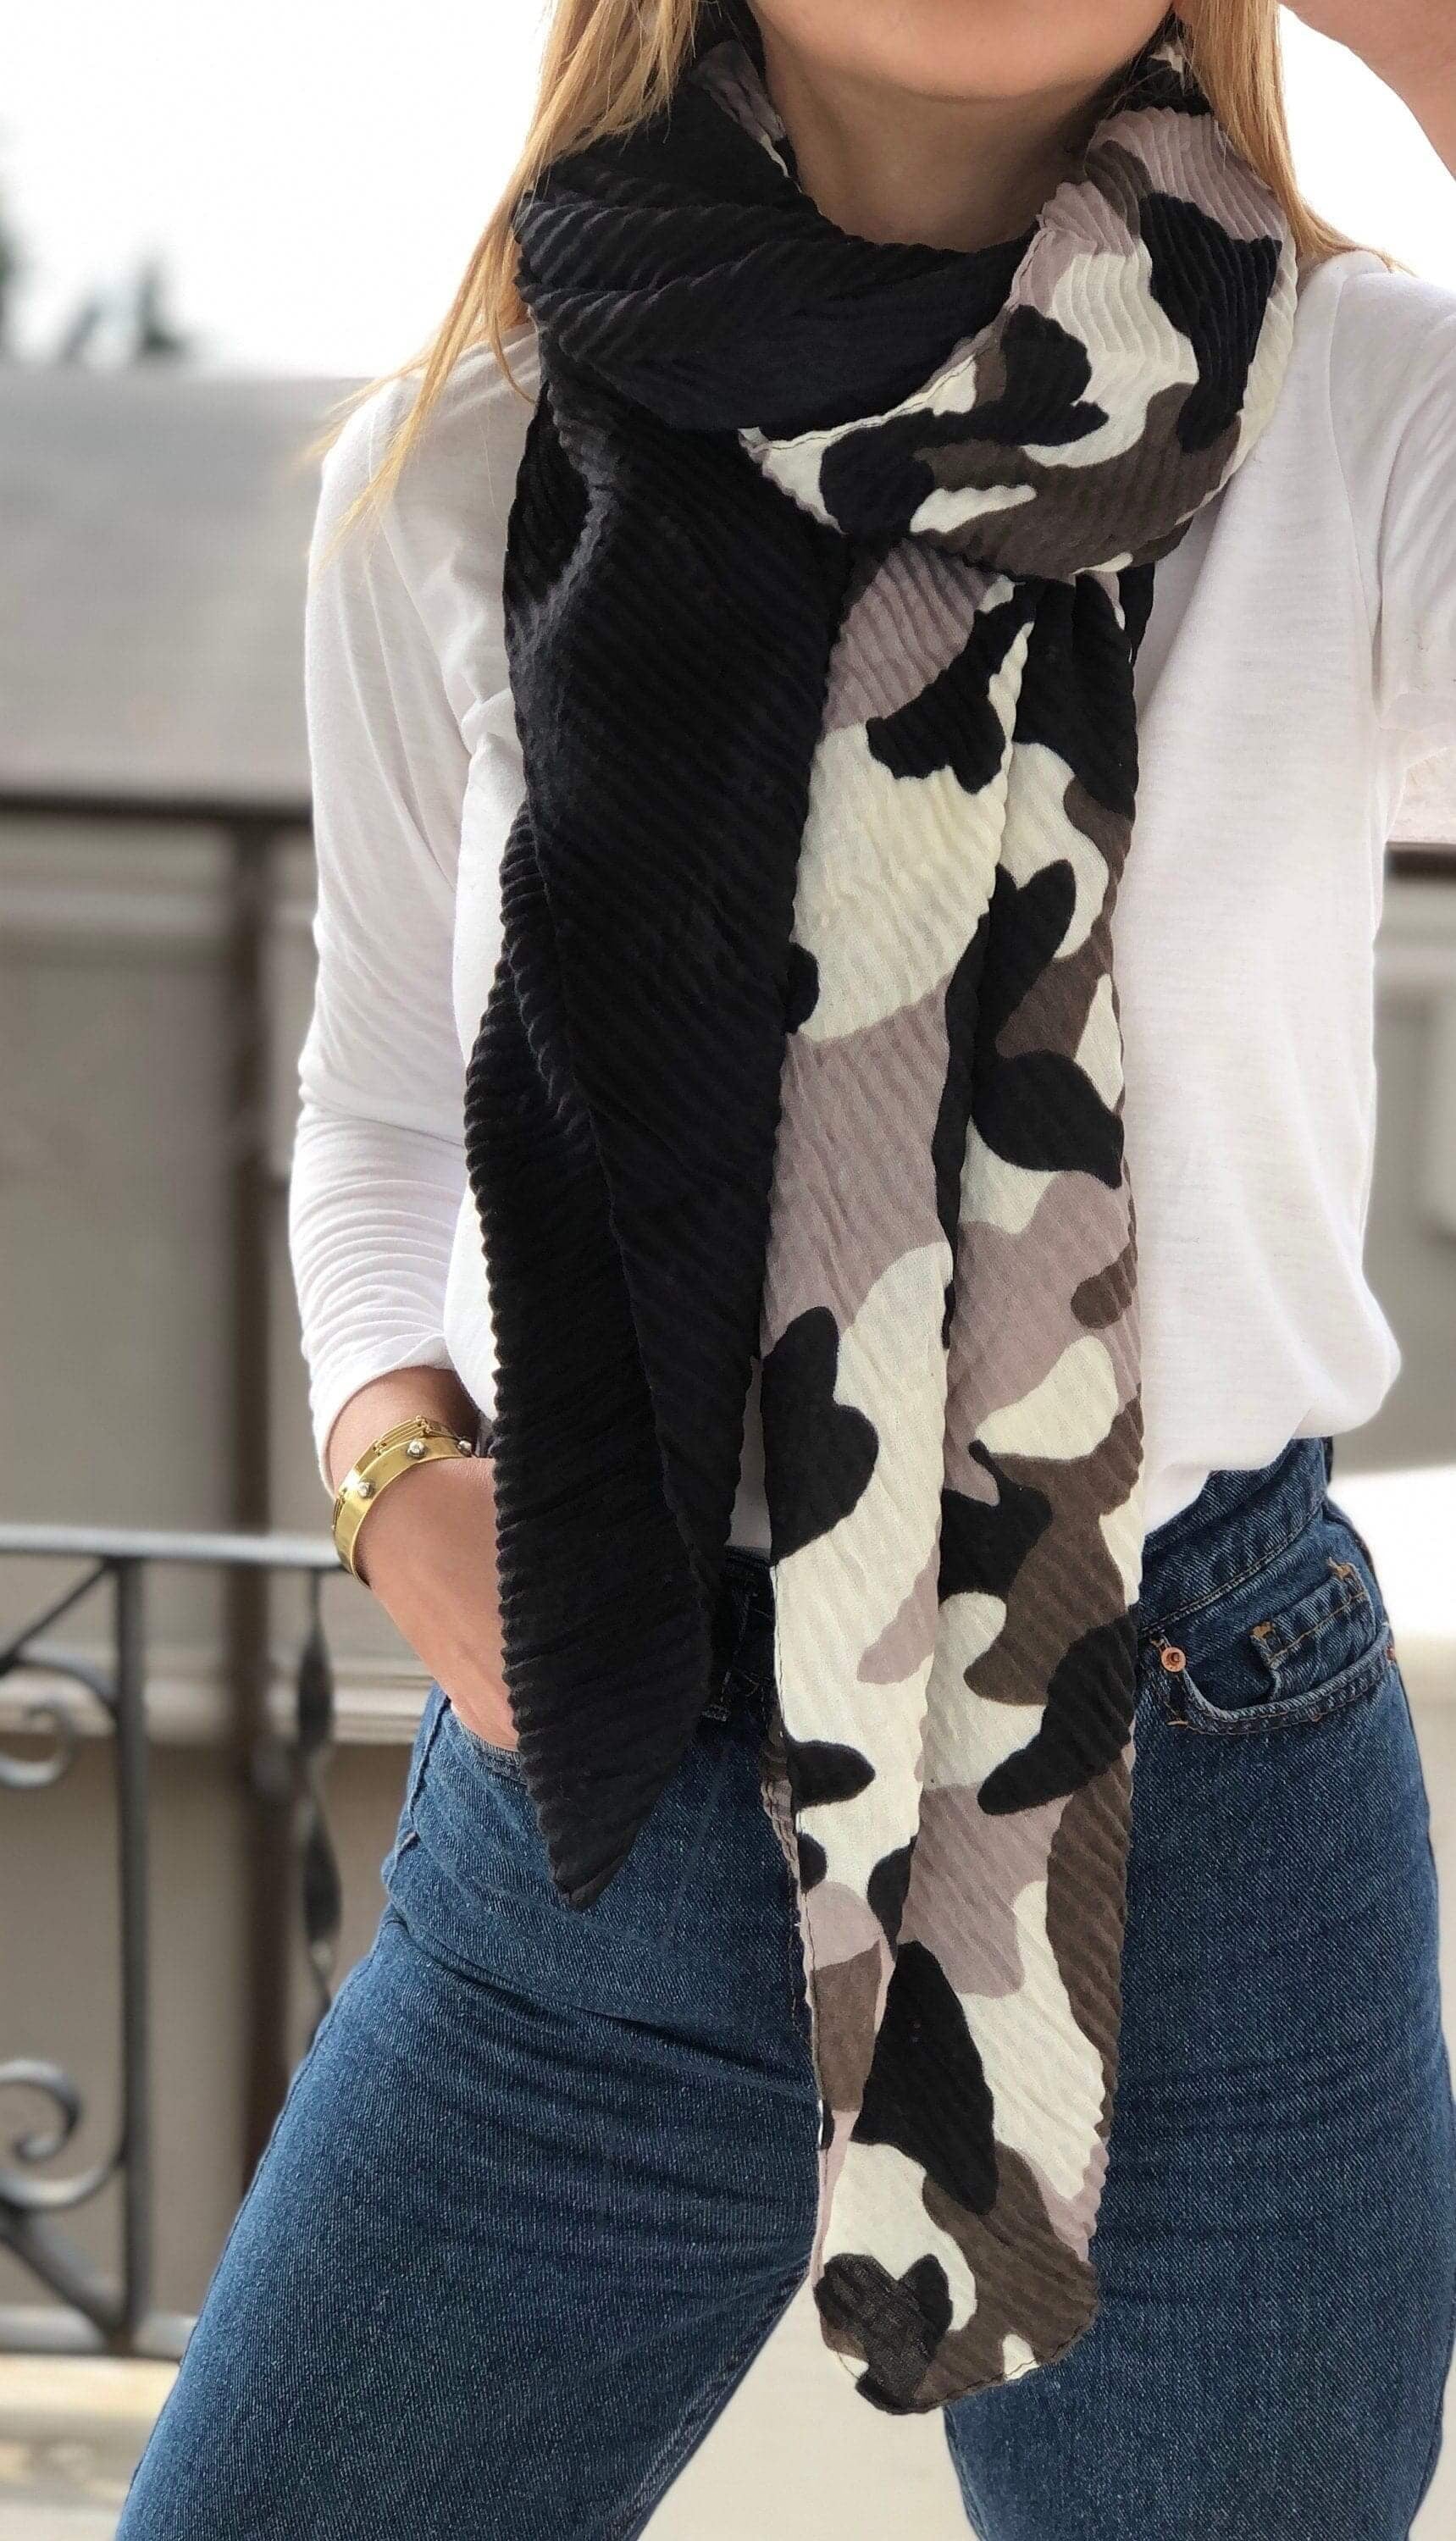 The perfect accessory to complete any outfit with this stylish grey, black and white camouflage scarf.